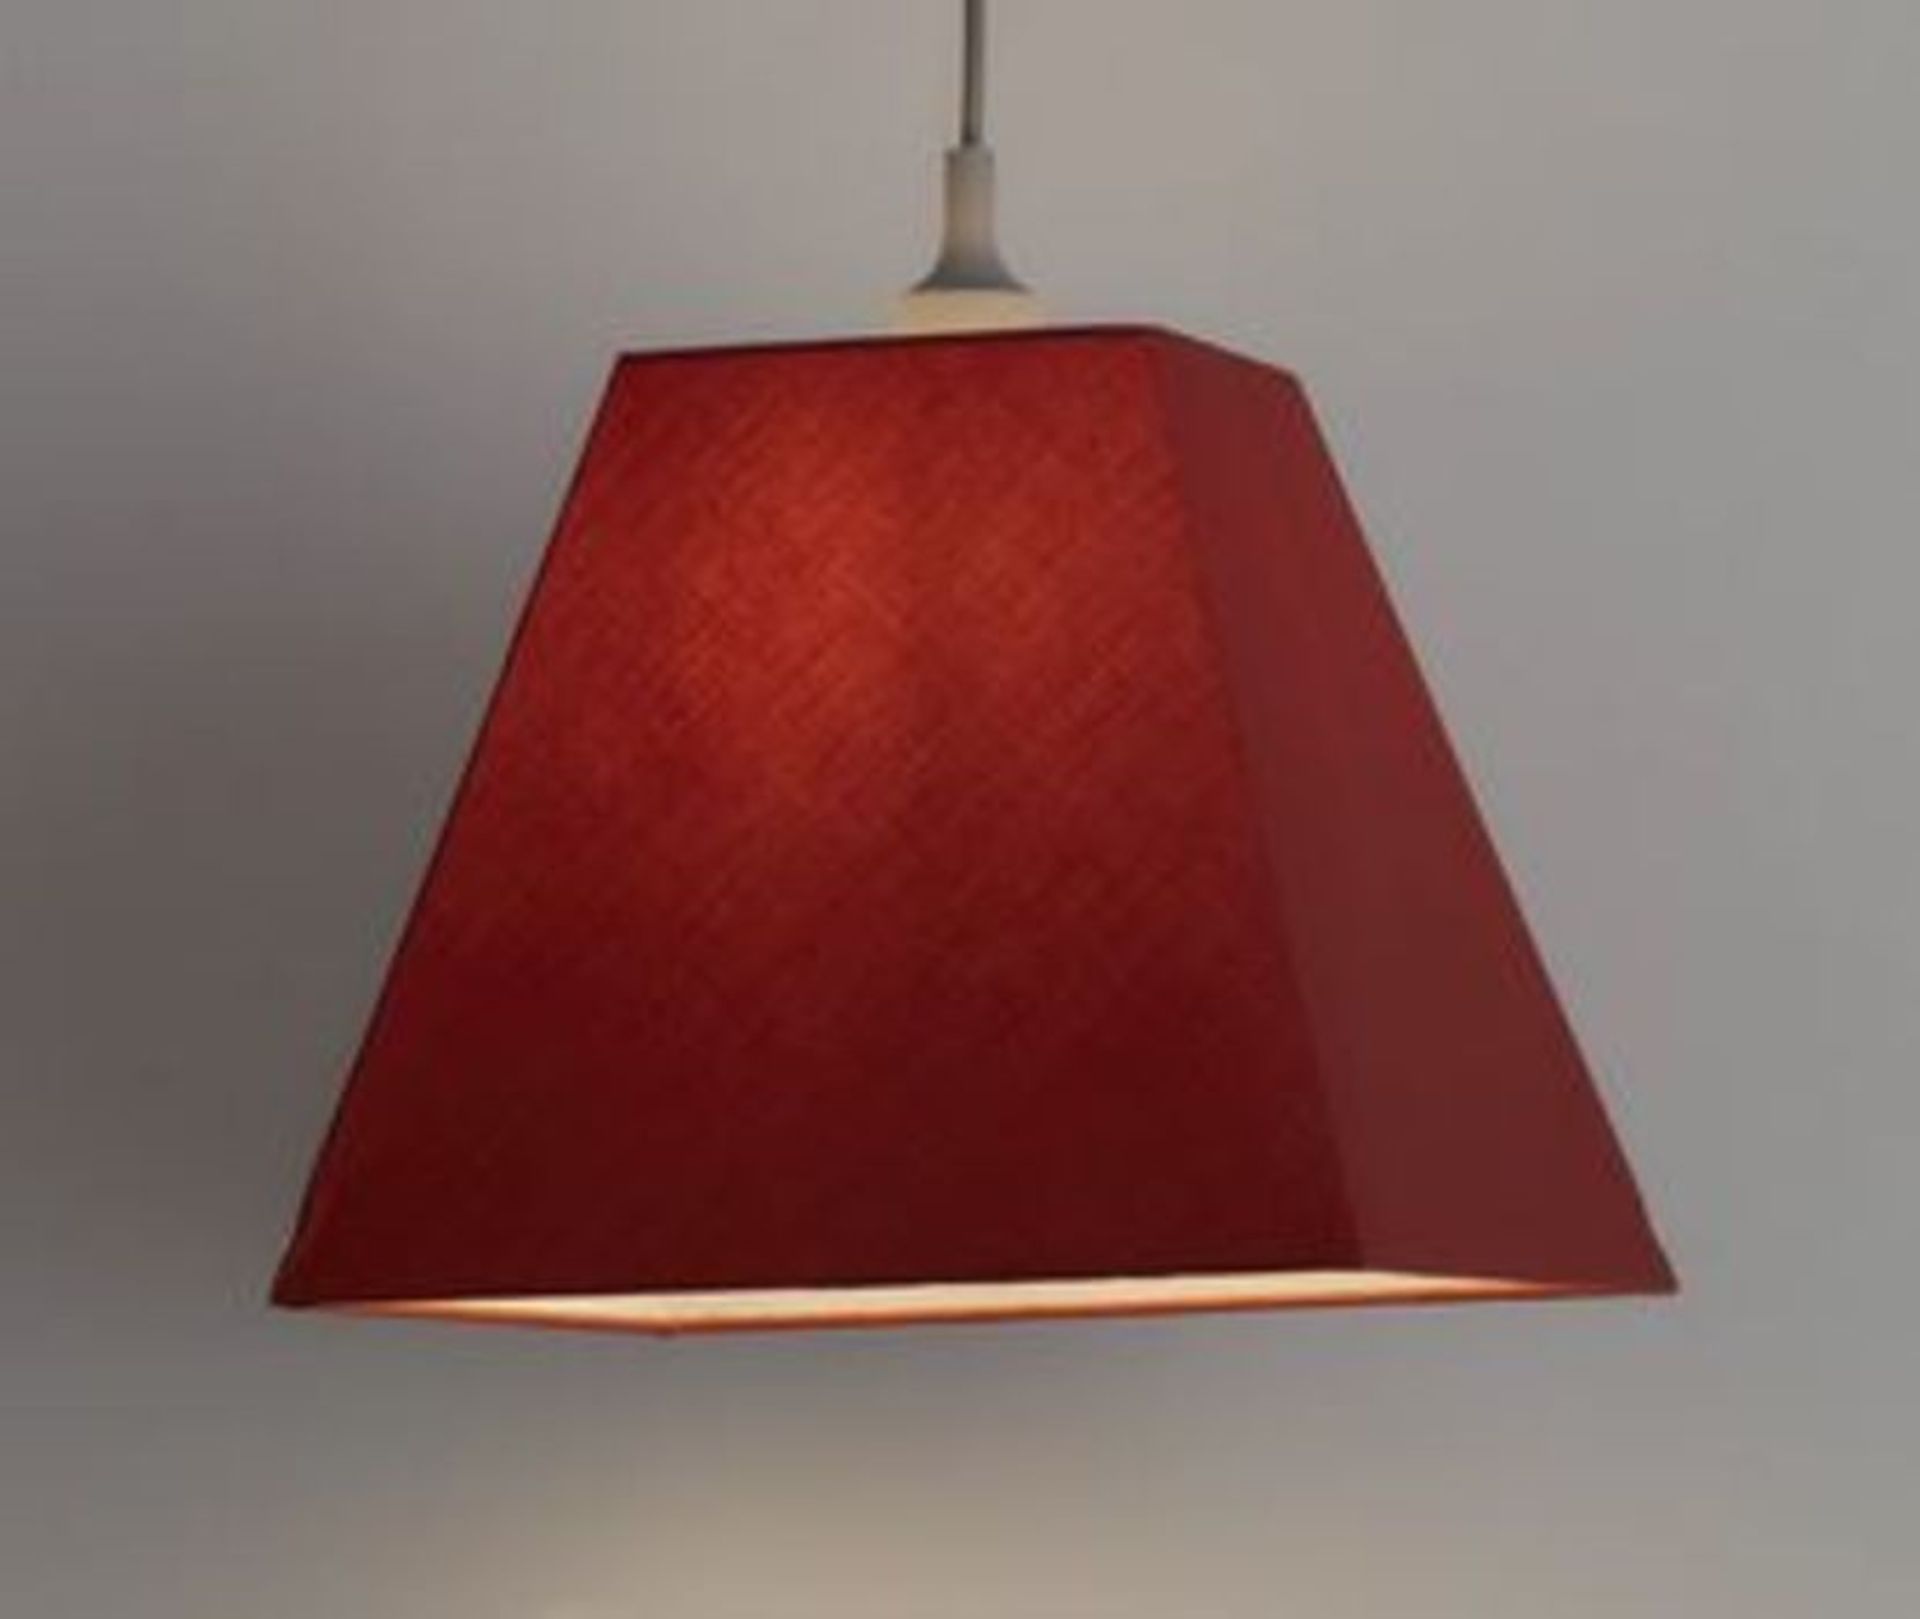 3 X QARNAY DARK RED FABRIC DYED LIGHT SHADE 30CM / RRP £36.00 / AS NEW CONDITION